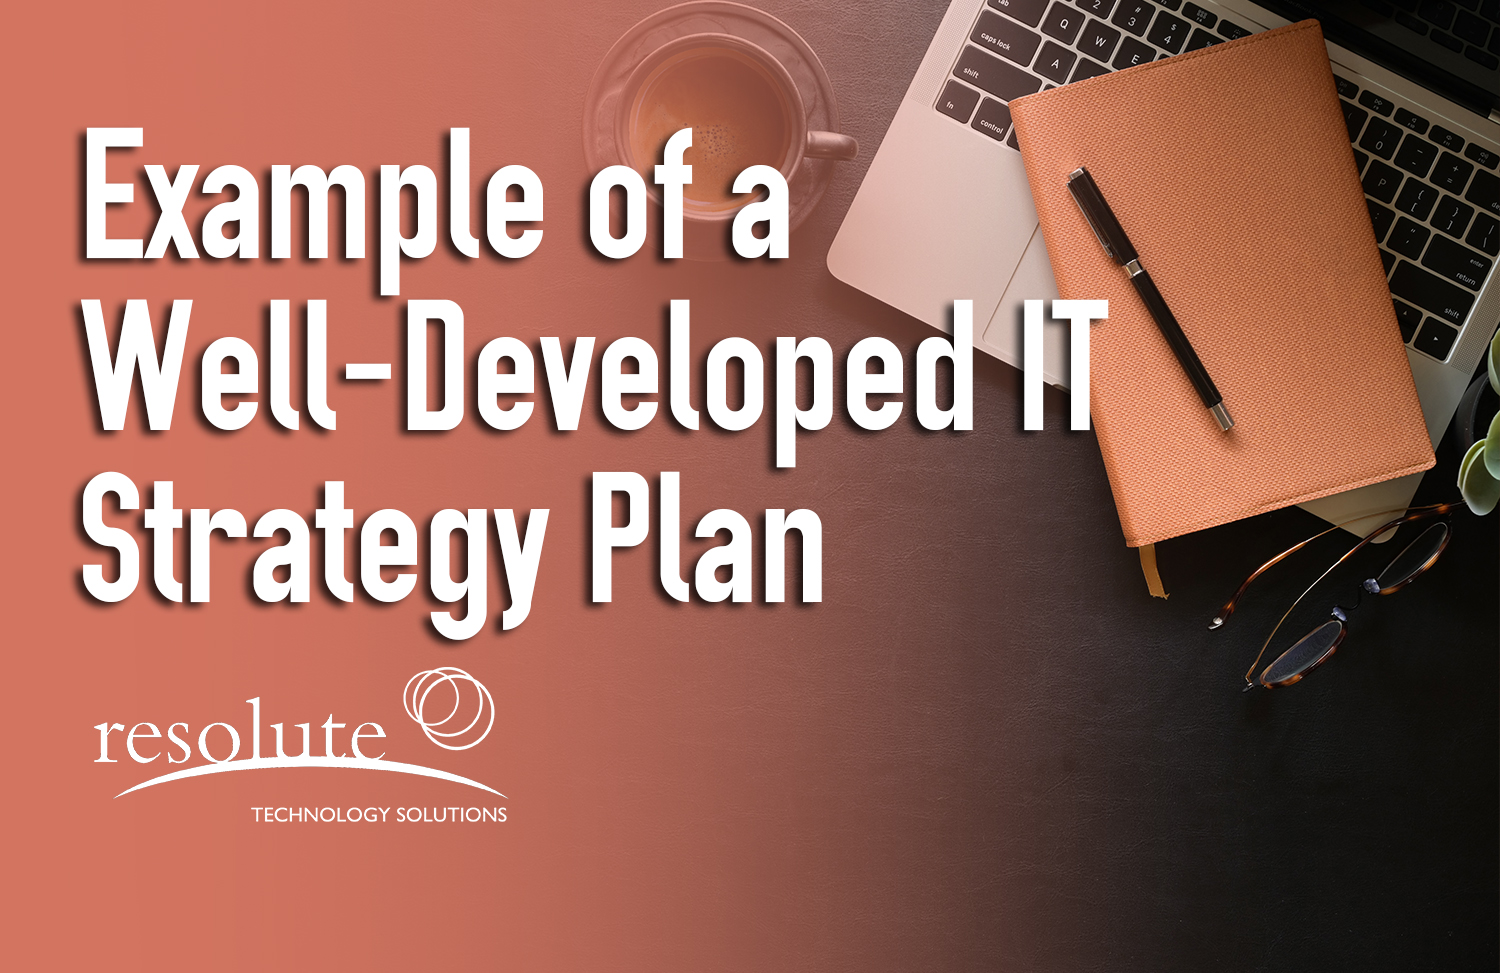 An Example of an IT Strategic Plan